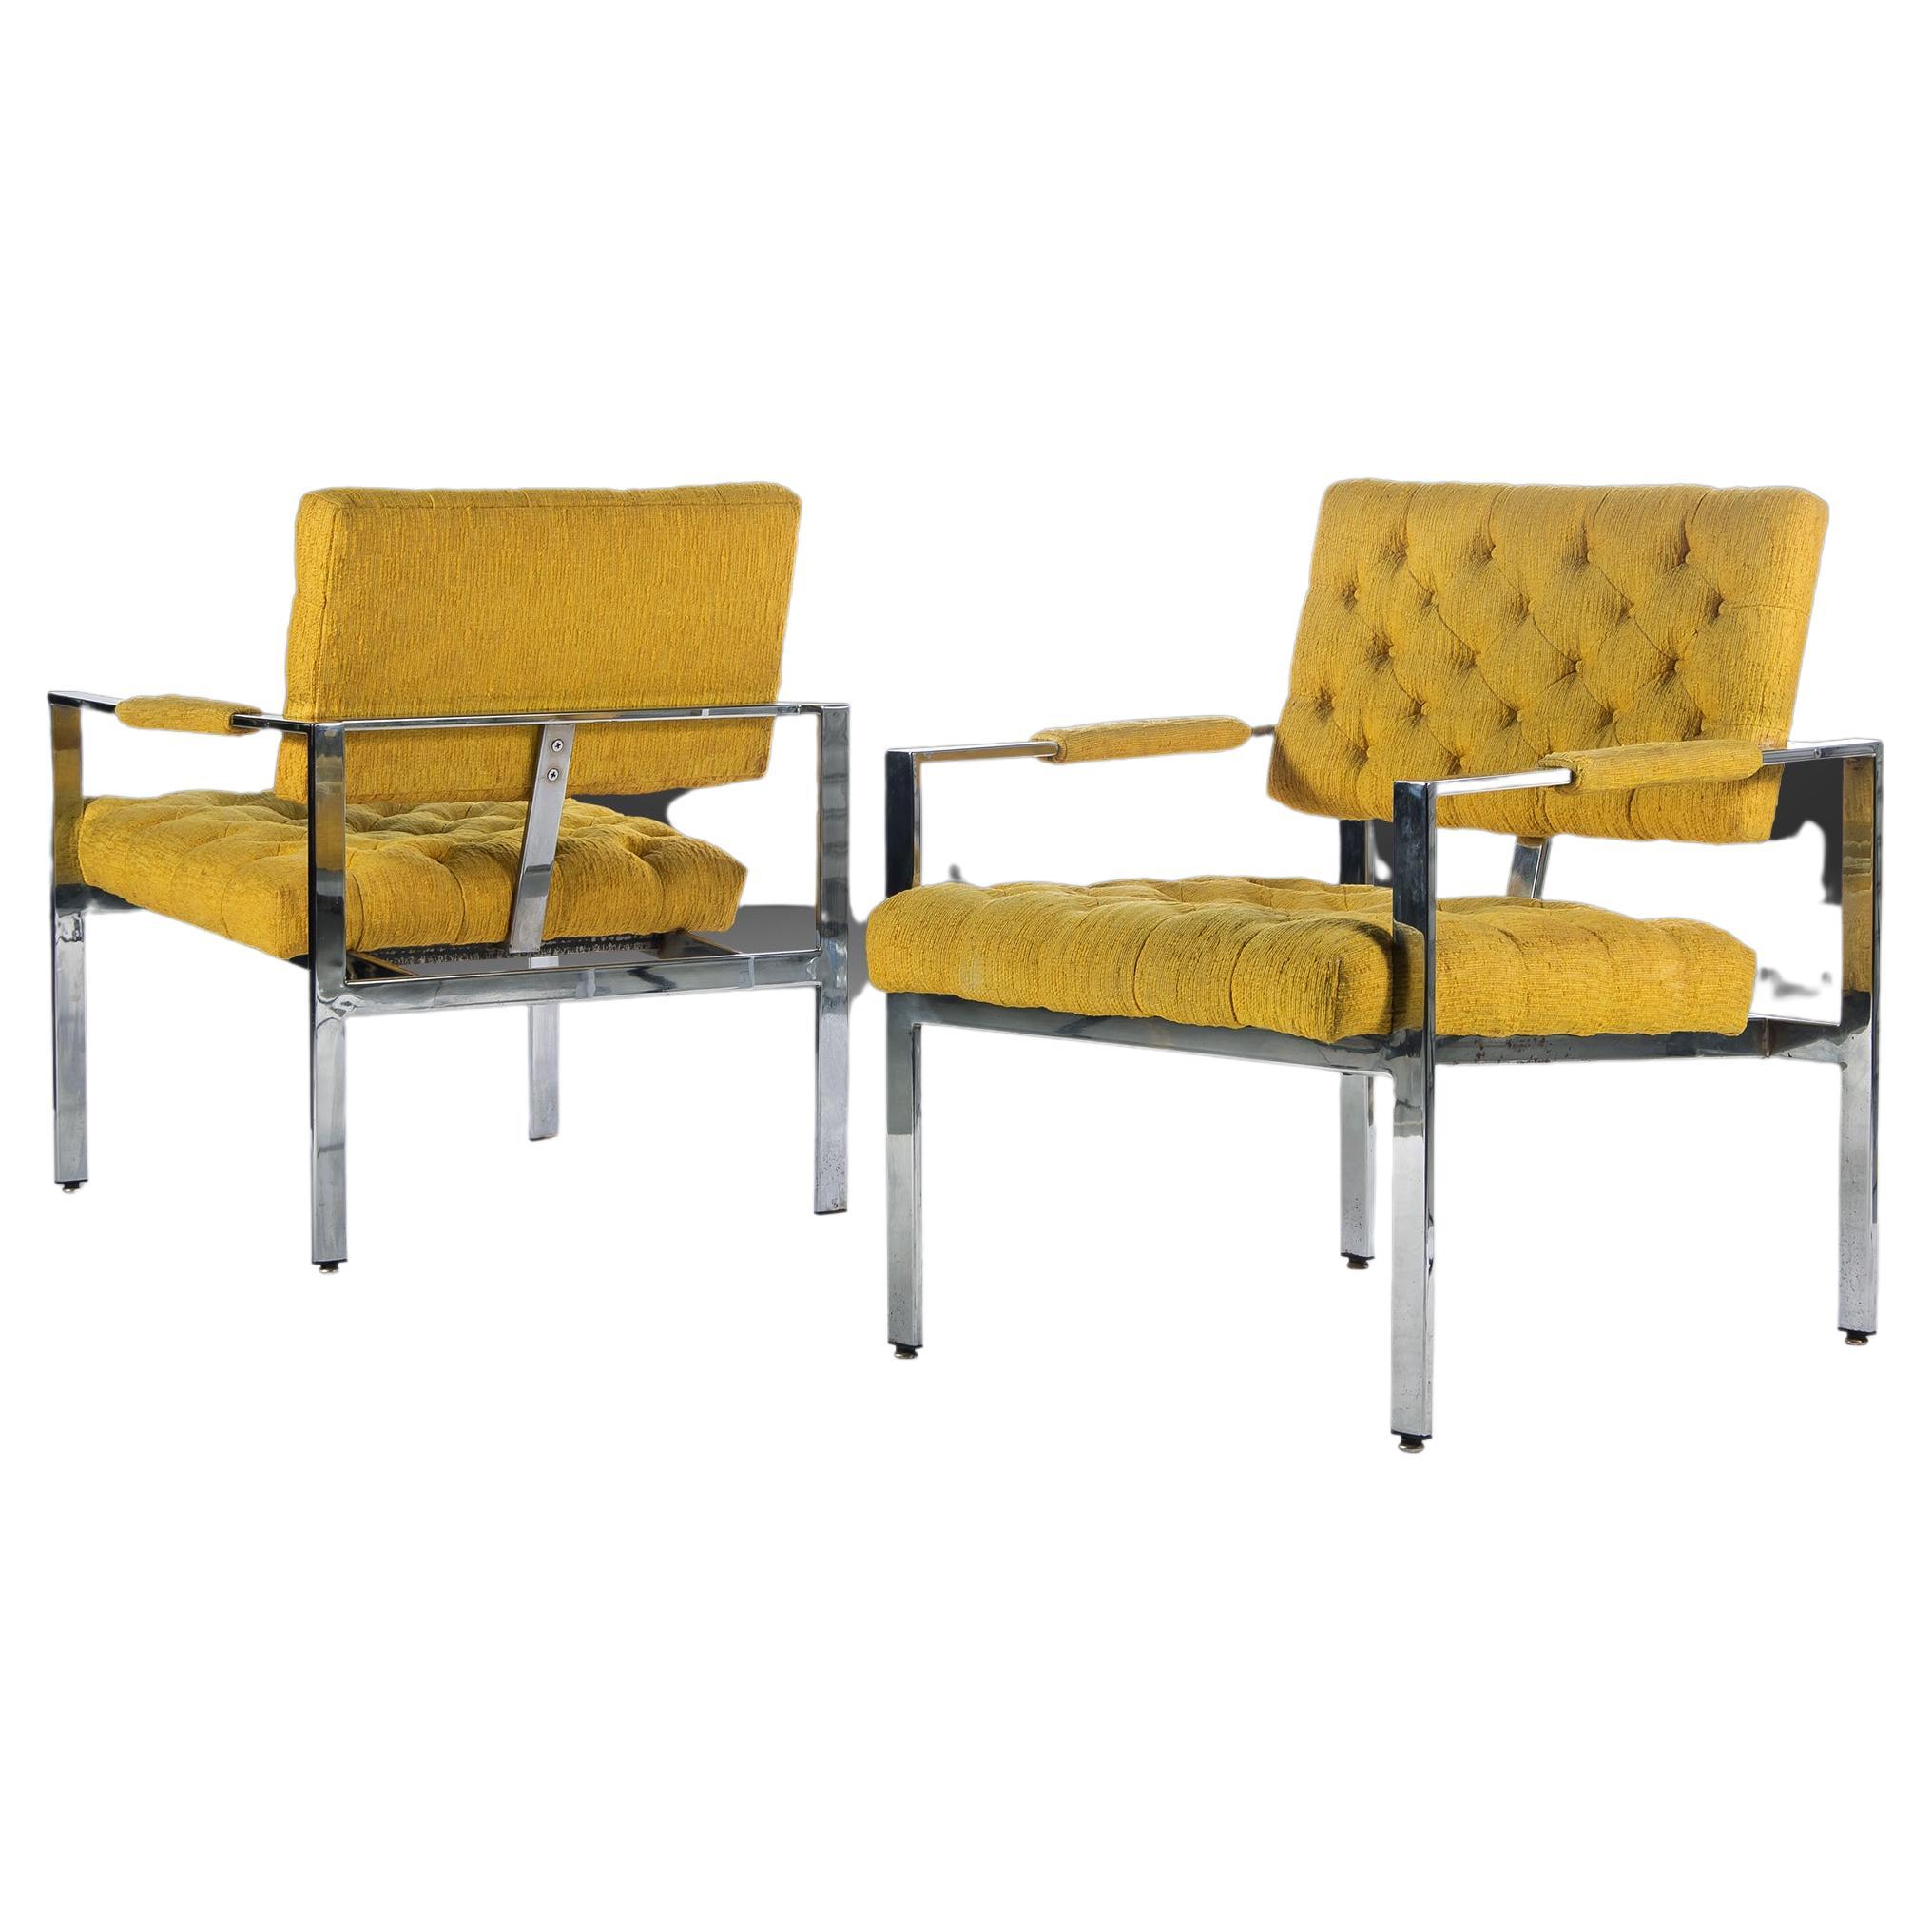 Pair of Chrome Lounge Chairs by Milo Baughman for Thayer Coggin, USA, c. 1970's